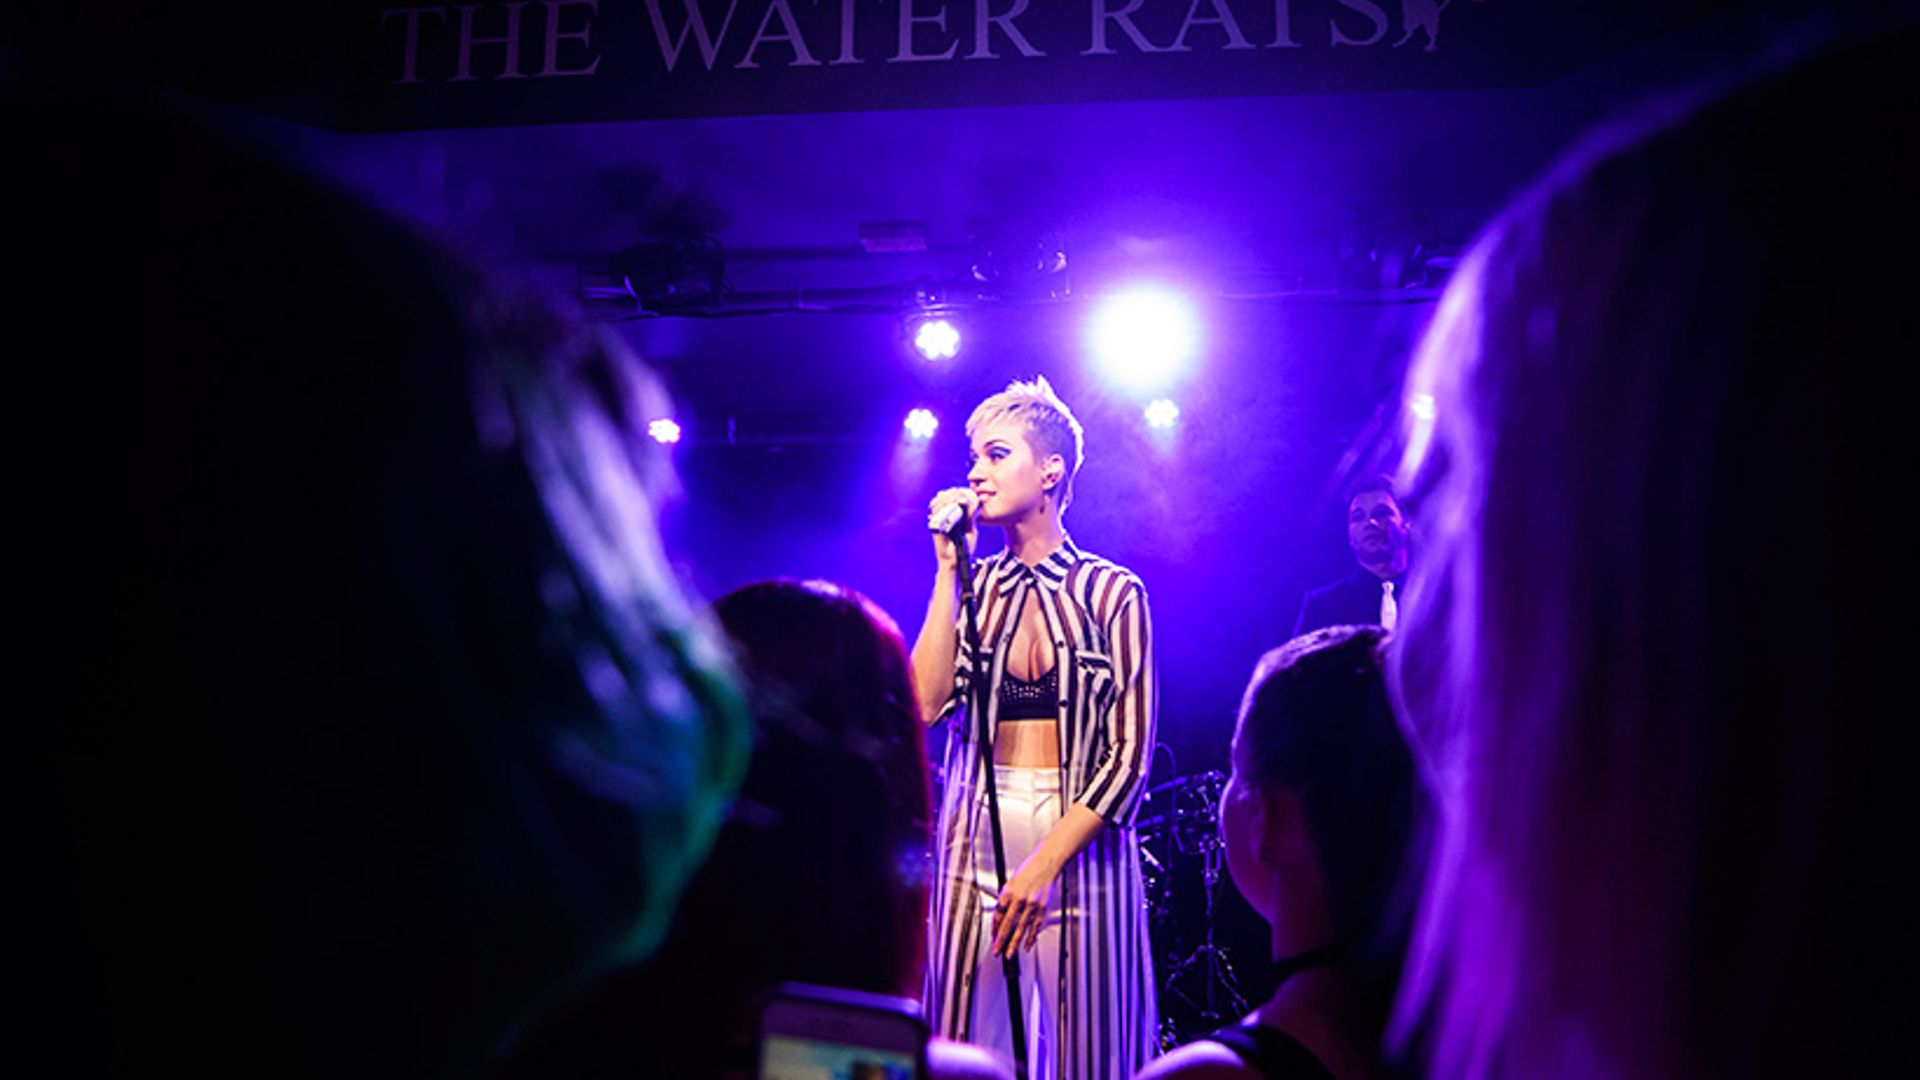 katy perry water rats